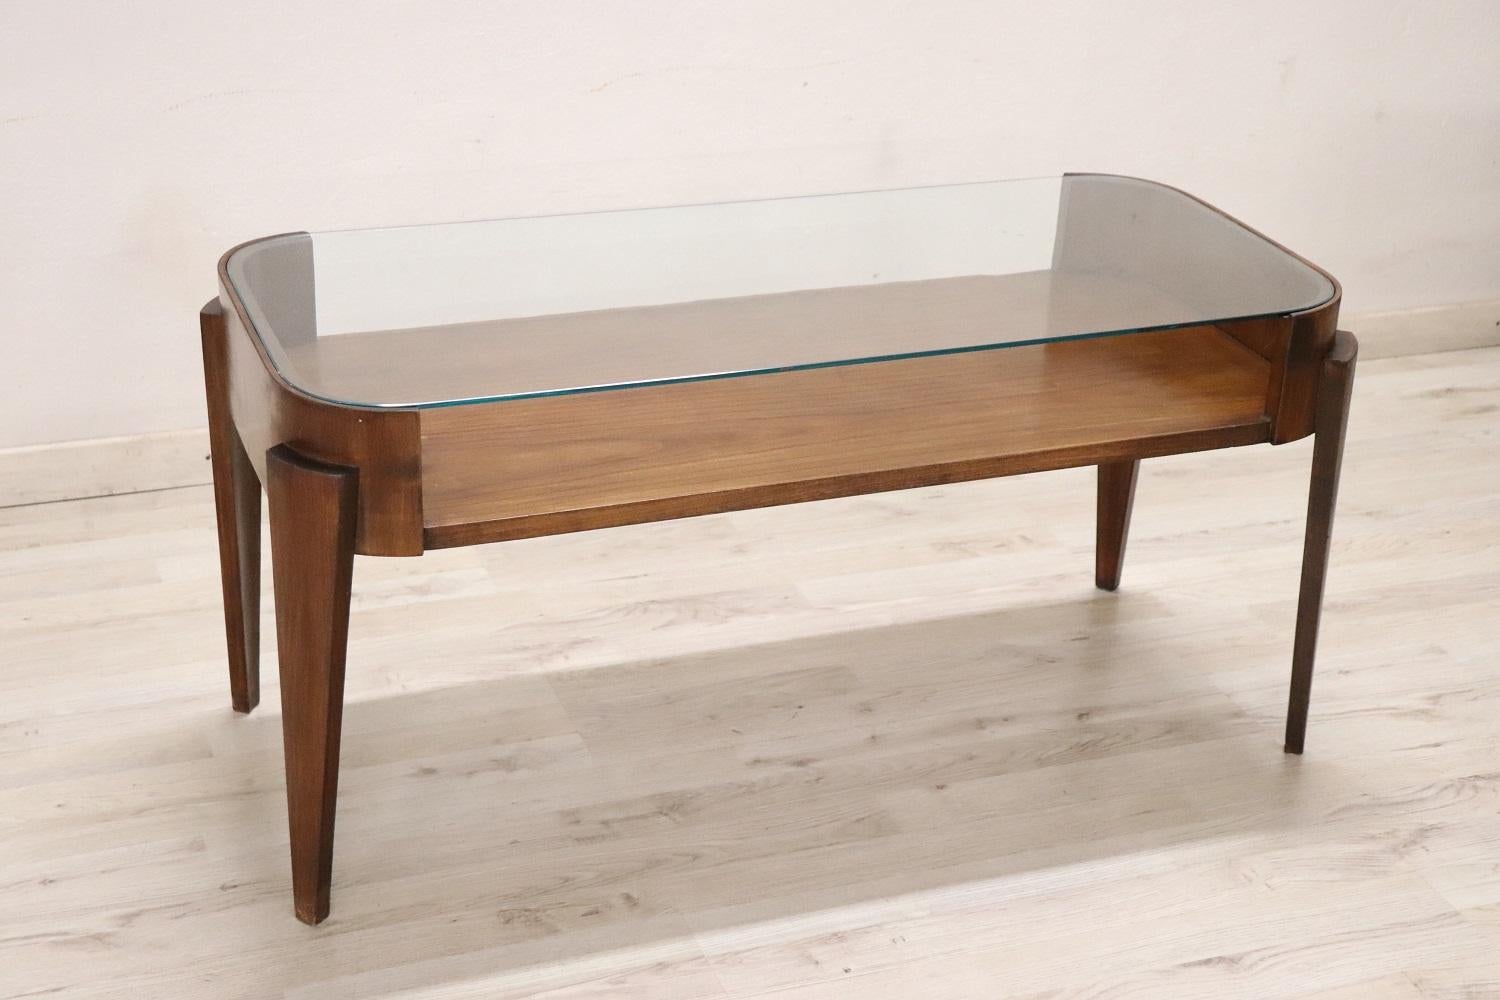 fine quality Italian design mid-century coffee table or sofa table. The table is in beech wood and glass top. In vintage good conditions. 